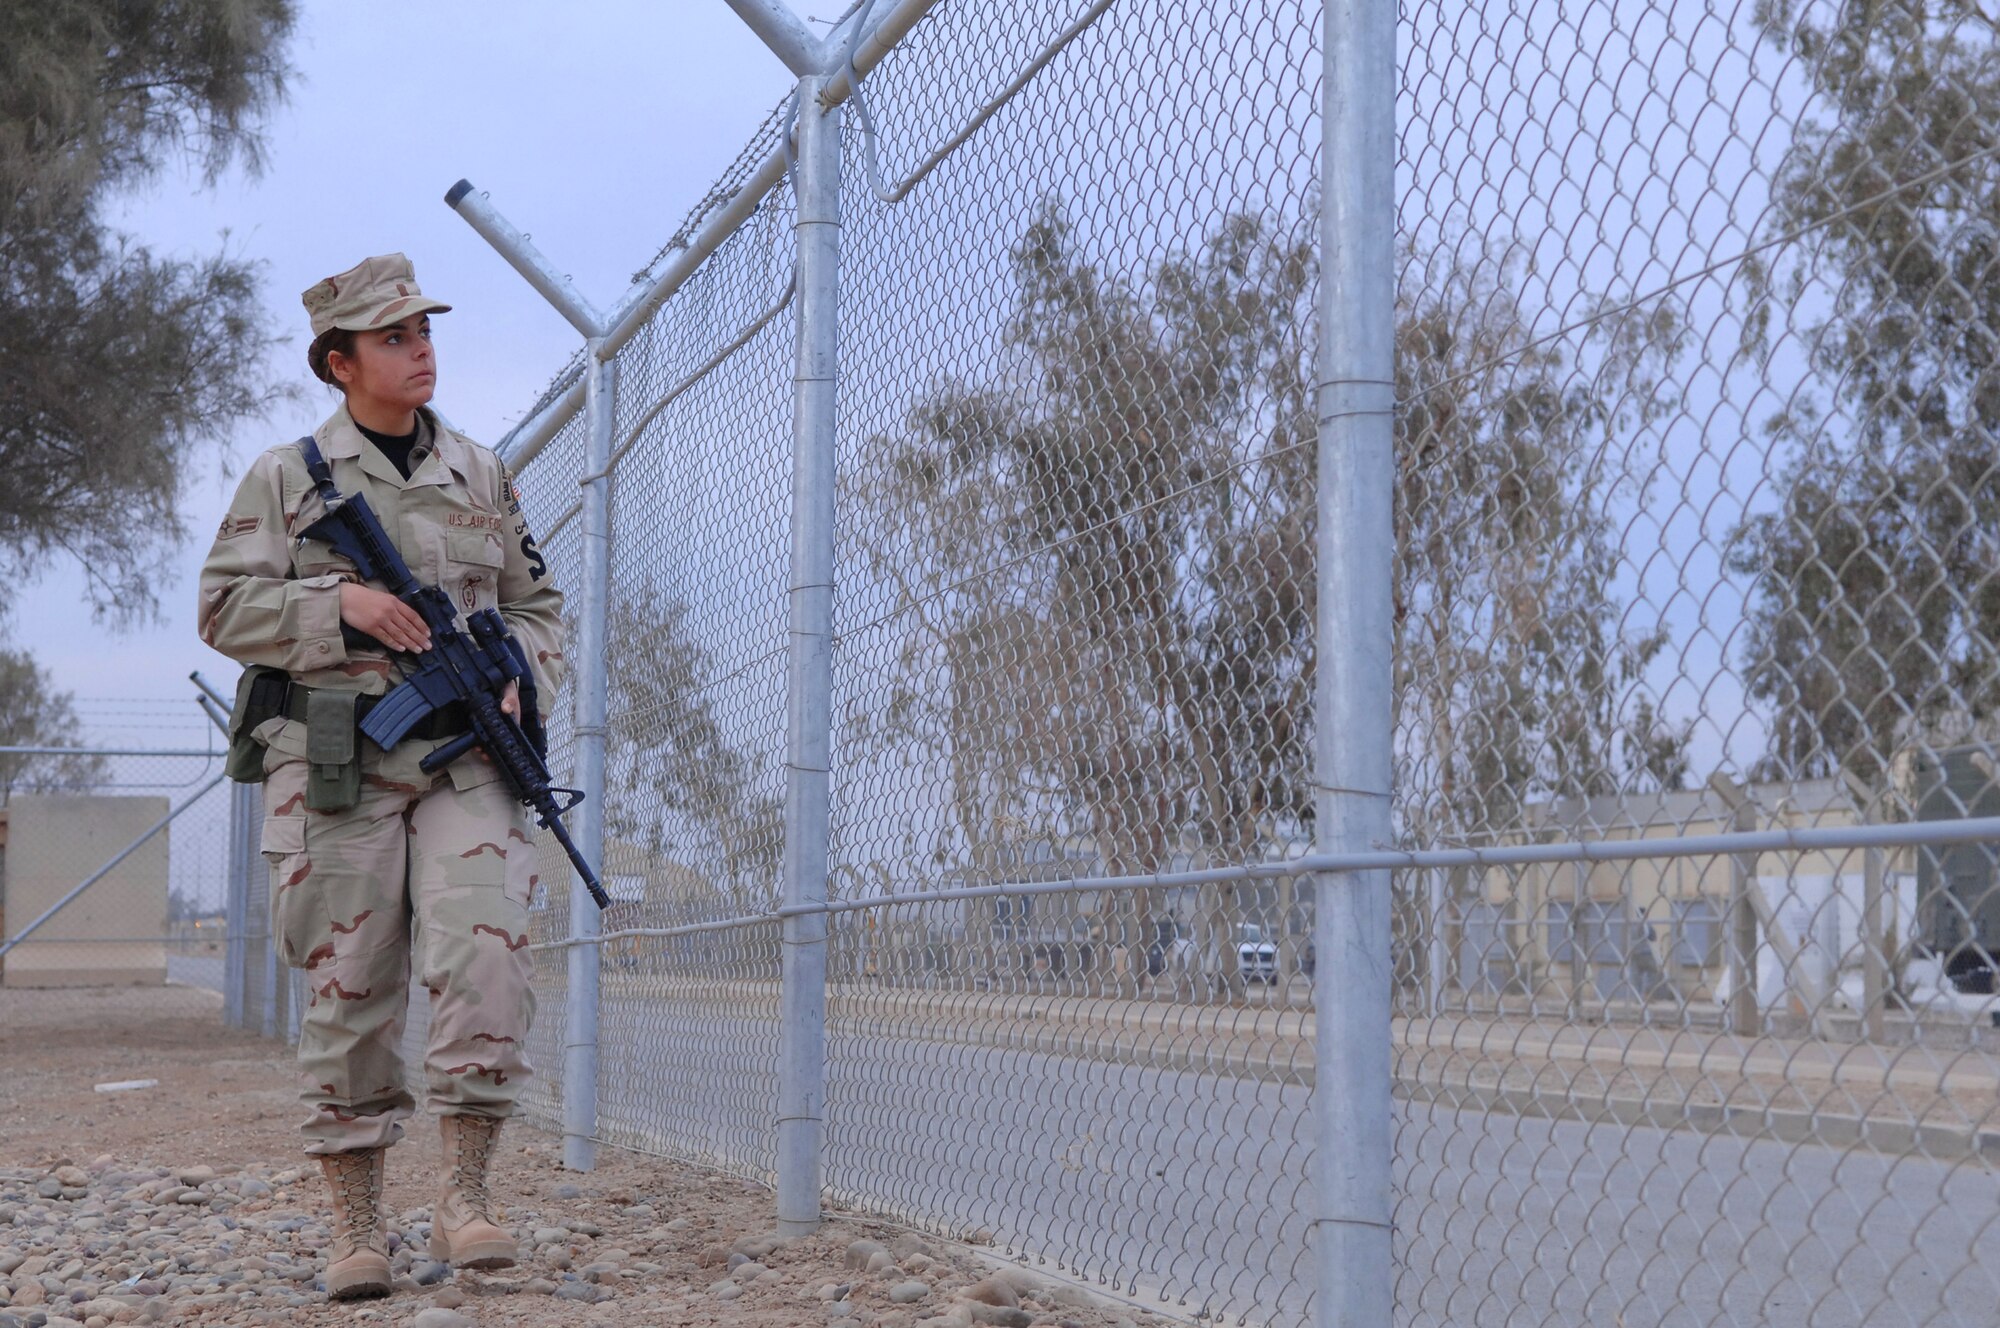 BALAD AIR BASE, Iraq -- Airman 1st Class Hollie-Anne Burgess, 332nd Expeditionary Security Forces Squadron, examines a stretch of fence line here, Jan 22. Airman Burgess is deployed from Spangdahlem Air Base, Germany.(U.S. Air Force photo/Senior Airman Julianne Showalter) 